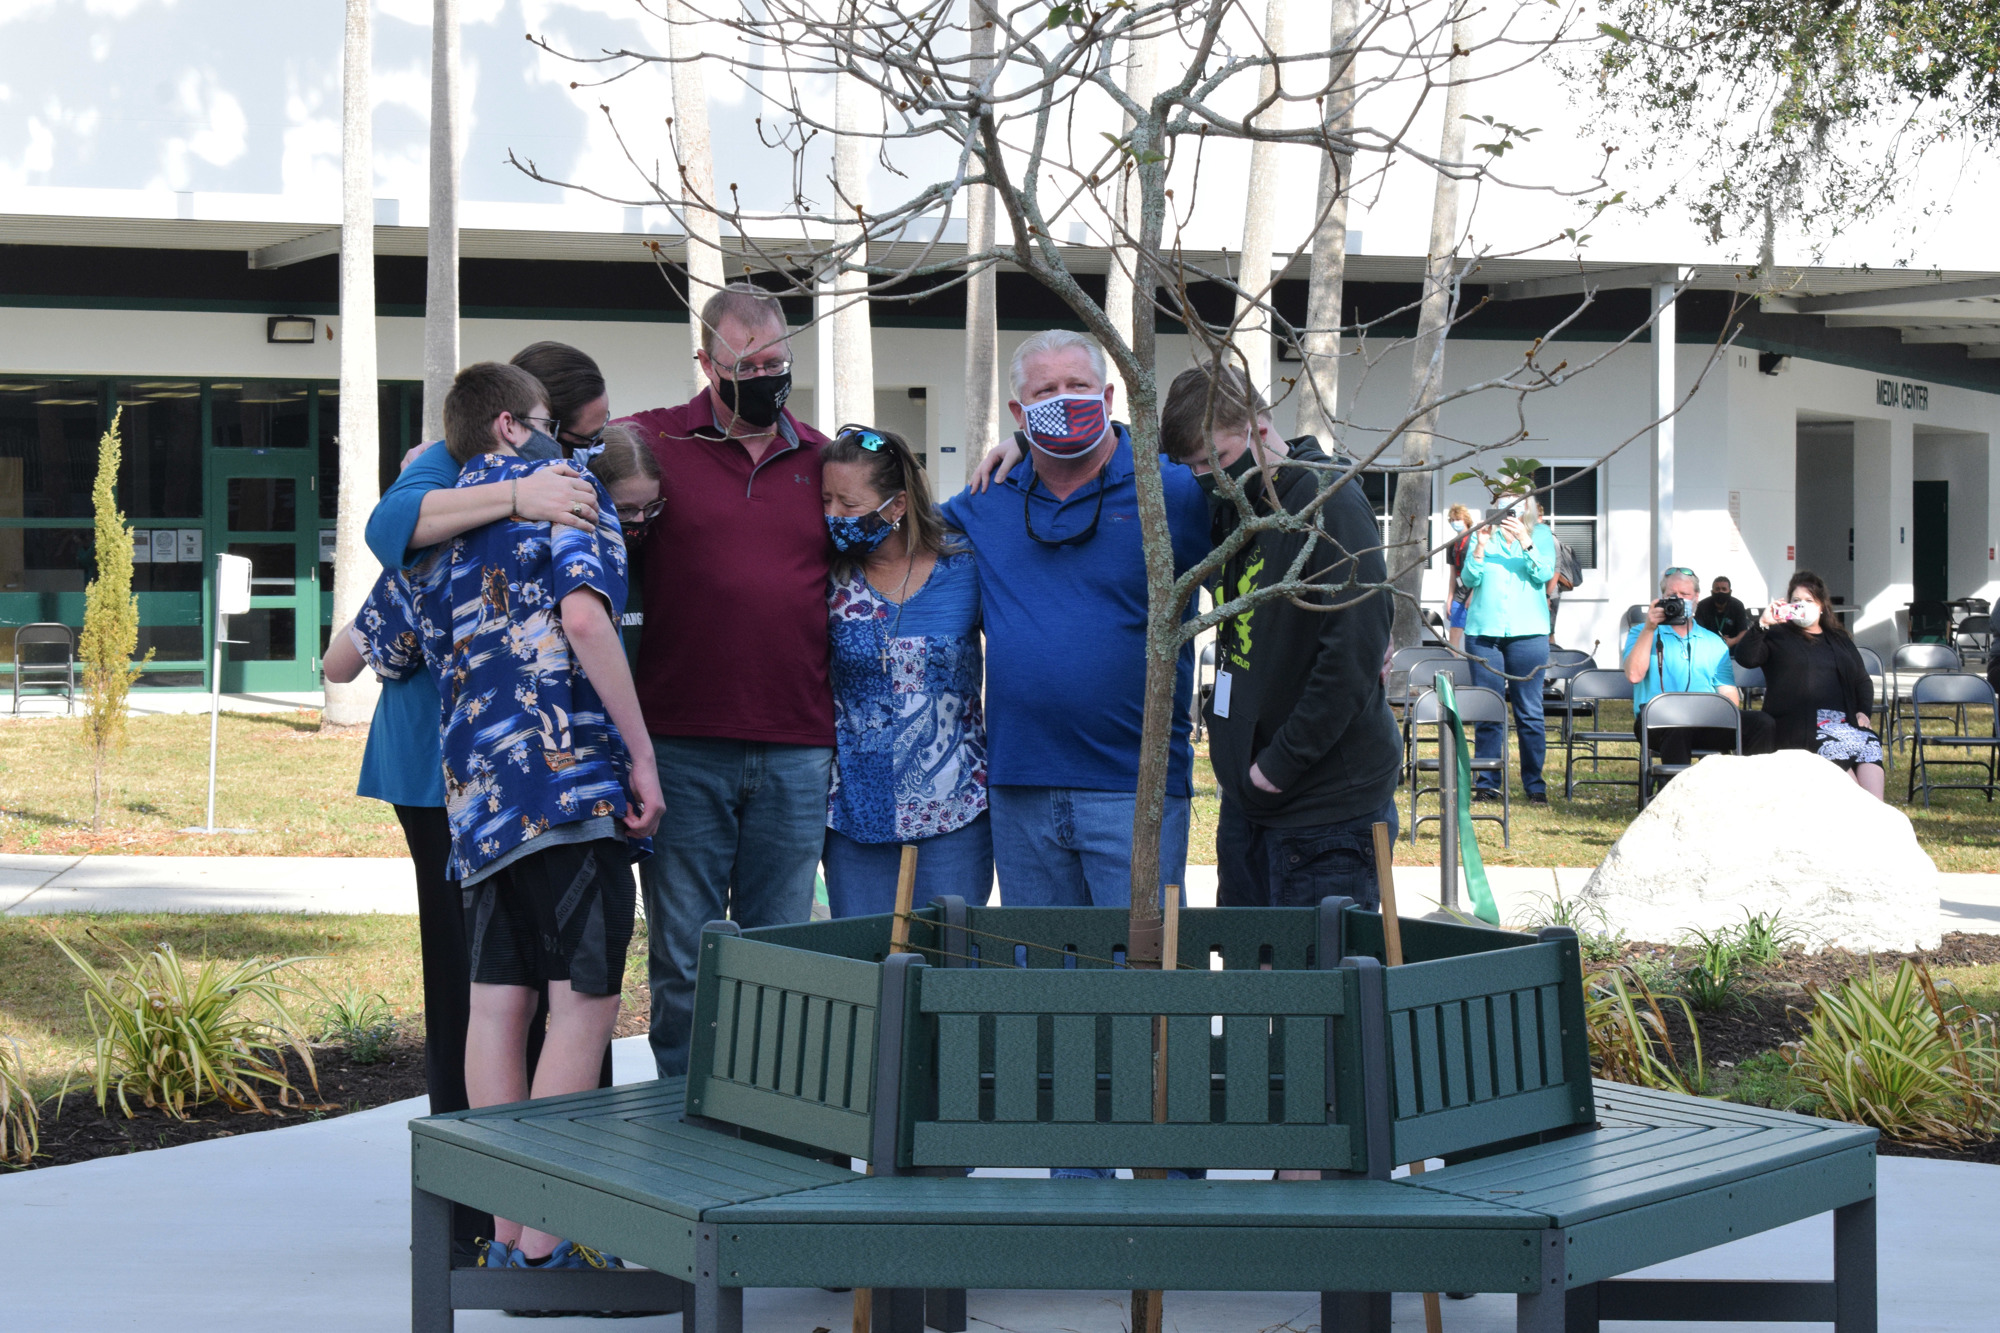 Robert Powers, Rebecca Powers, Katie Powers, Dan Powers, Shayleen Coyner, Scott Coyner and Cory Coyner hug each other while standing in front of the bench that honors their loved ones, Matthew Powers and Chase Coyner.